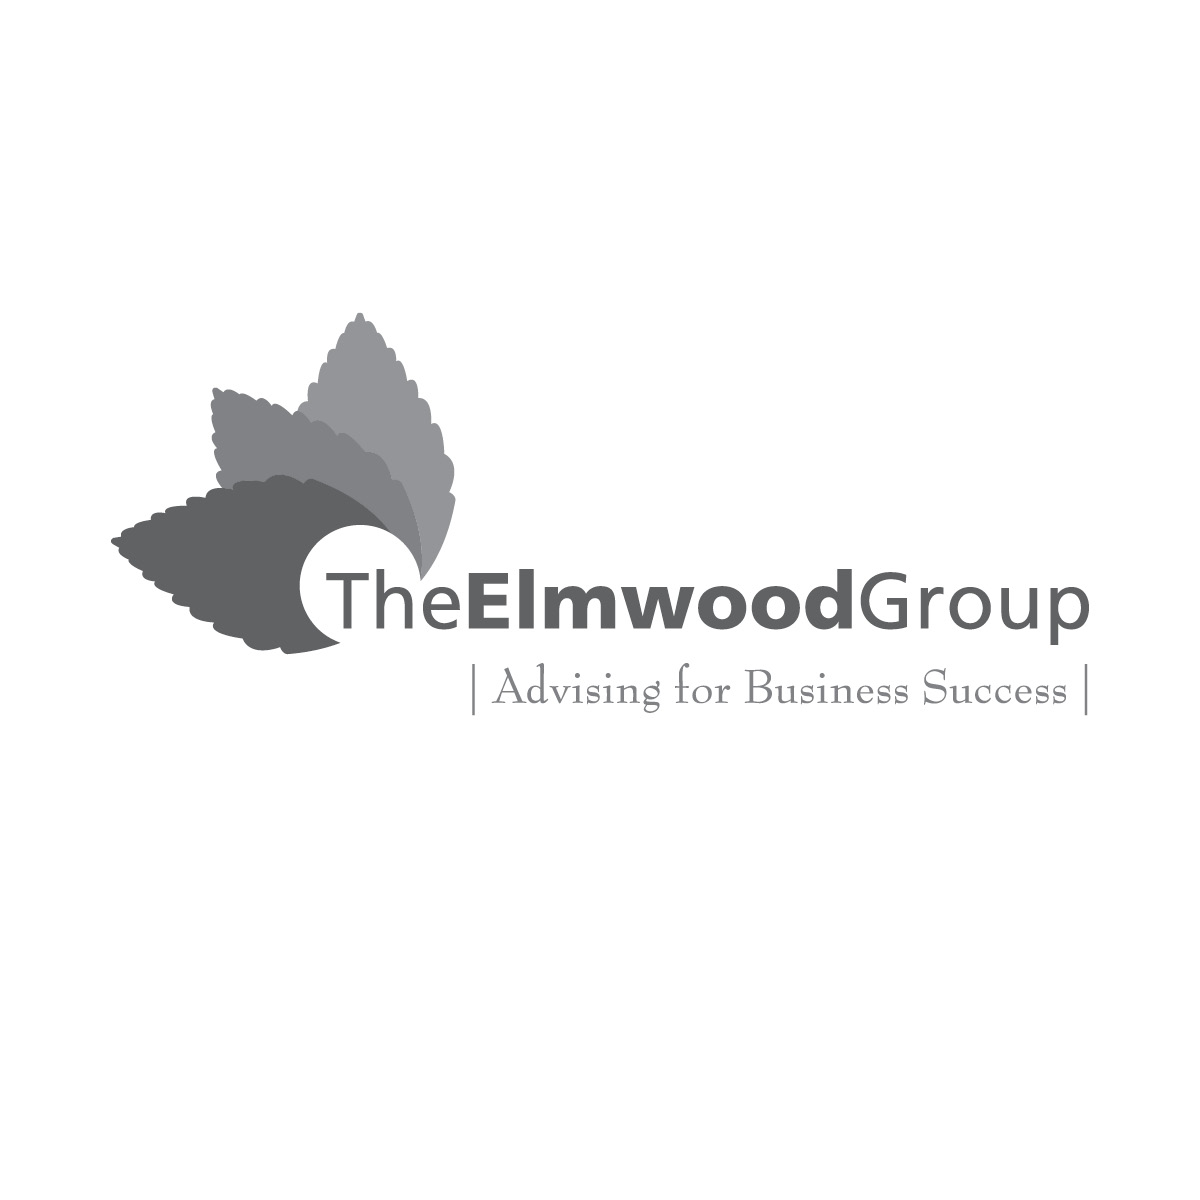 The Elmwood Group - Advising for Business Success